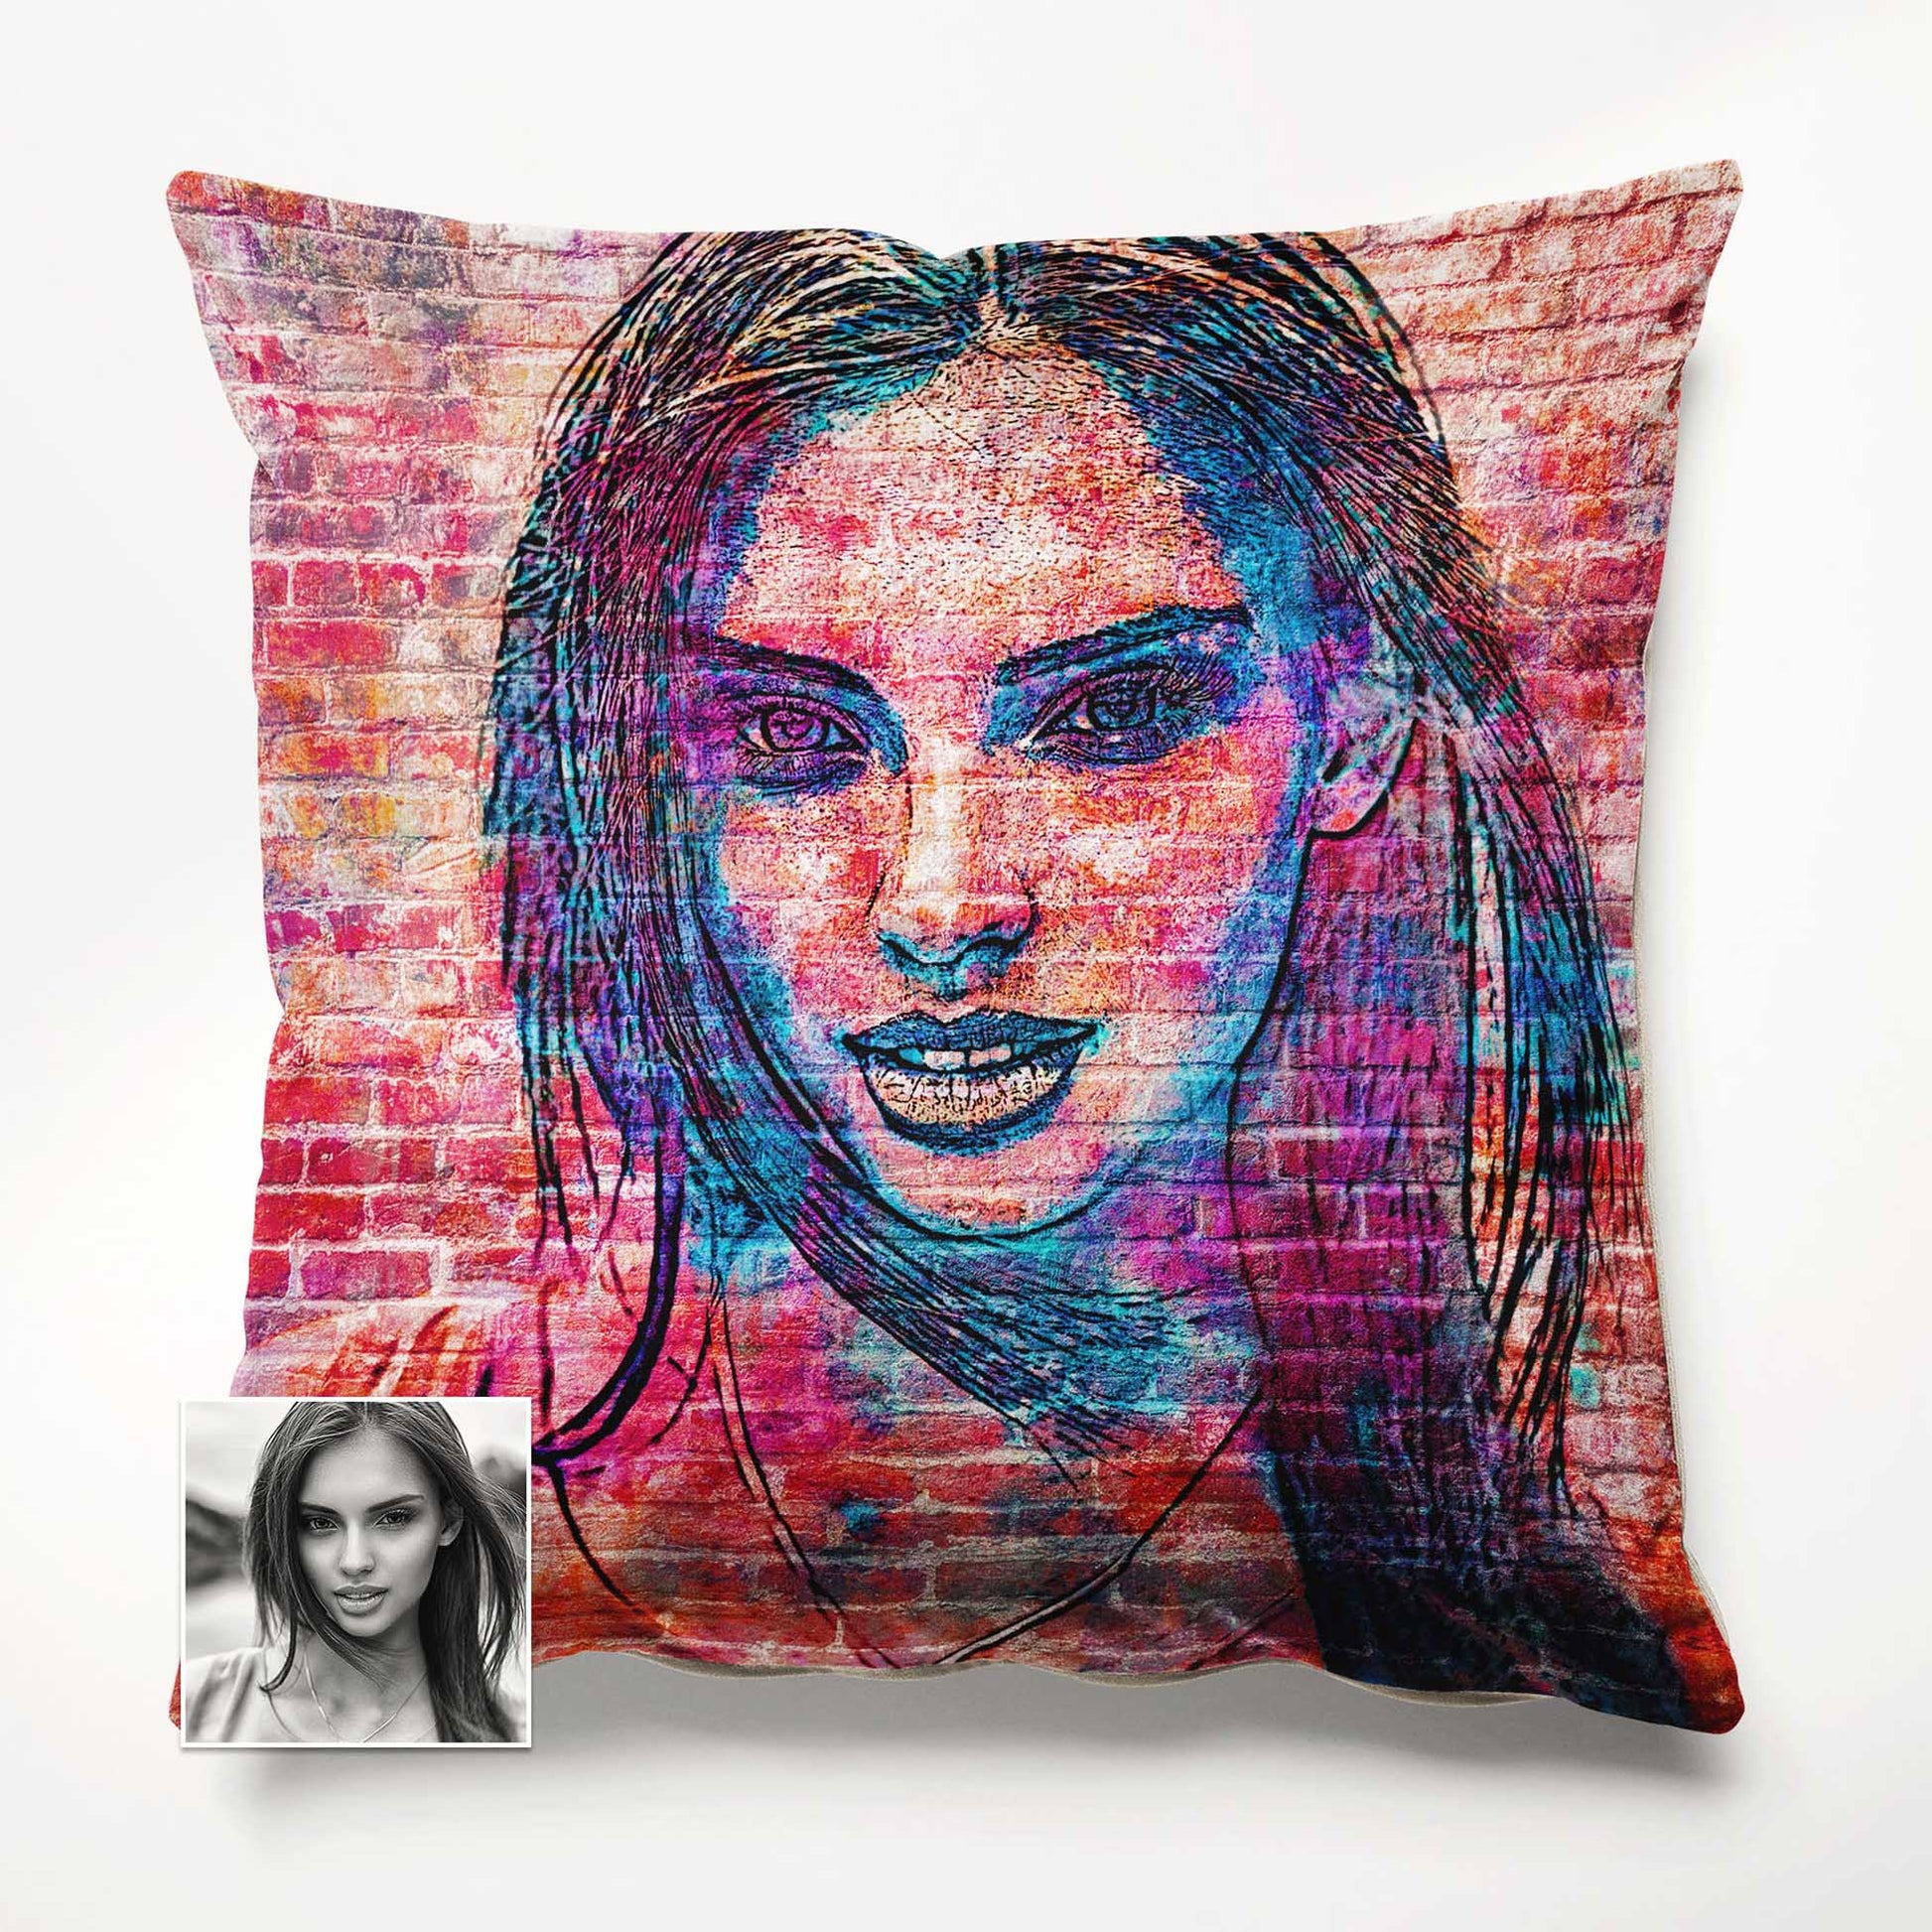 Add a touch of urban charm to your space with the Personalised Brick Graffiti Street Art Cushion. Crafted by hand and made from soft velvet, it offers a cozy and inviting feel. Personalise it with a print from your photo